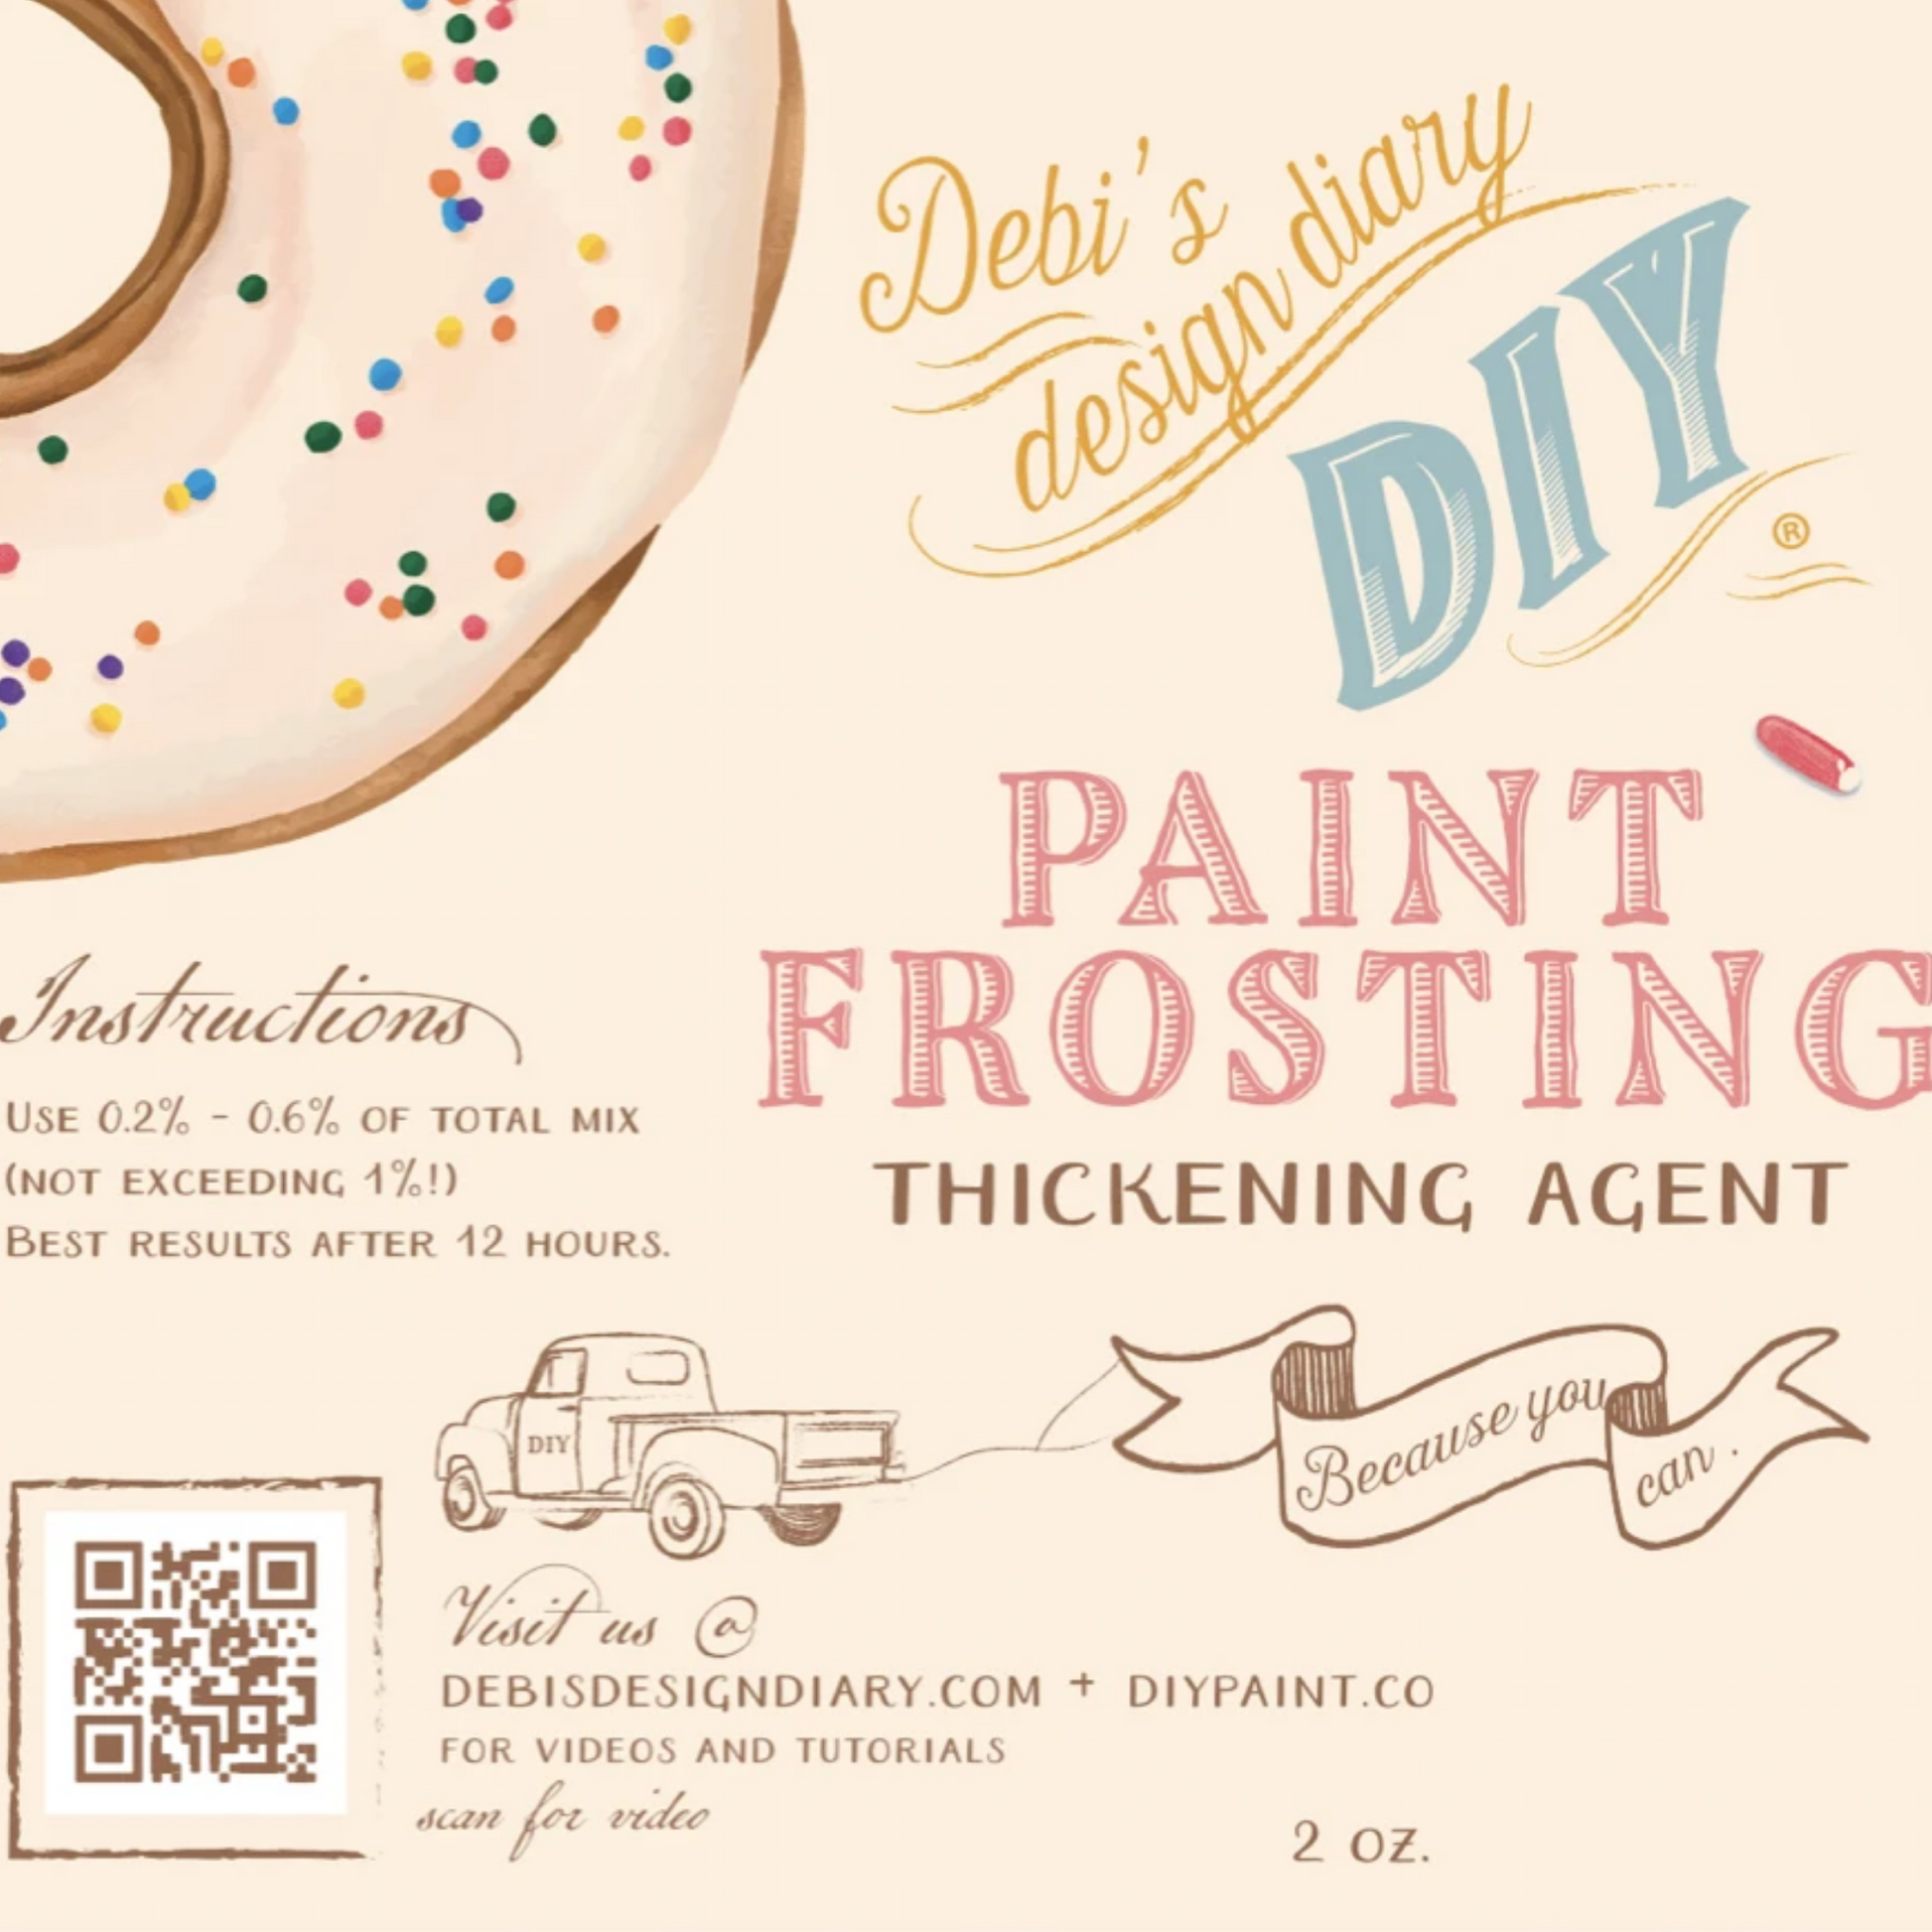 Paint Frosting-Paint Thickener 2 oz.  by DIY Paint available at Milton's Daughter